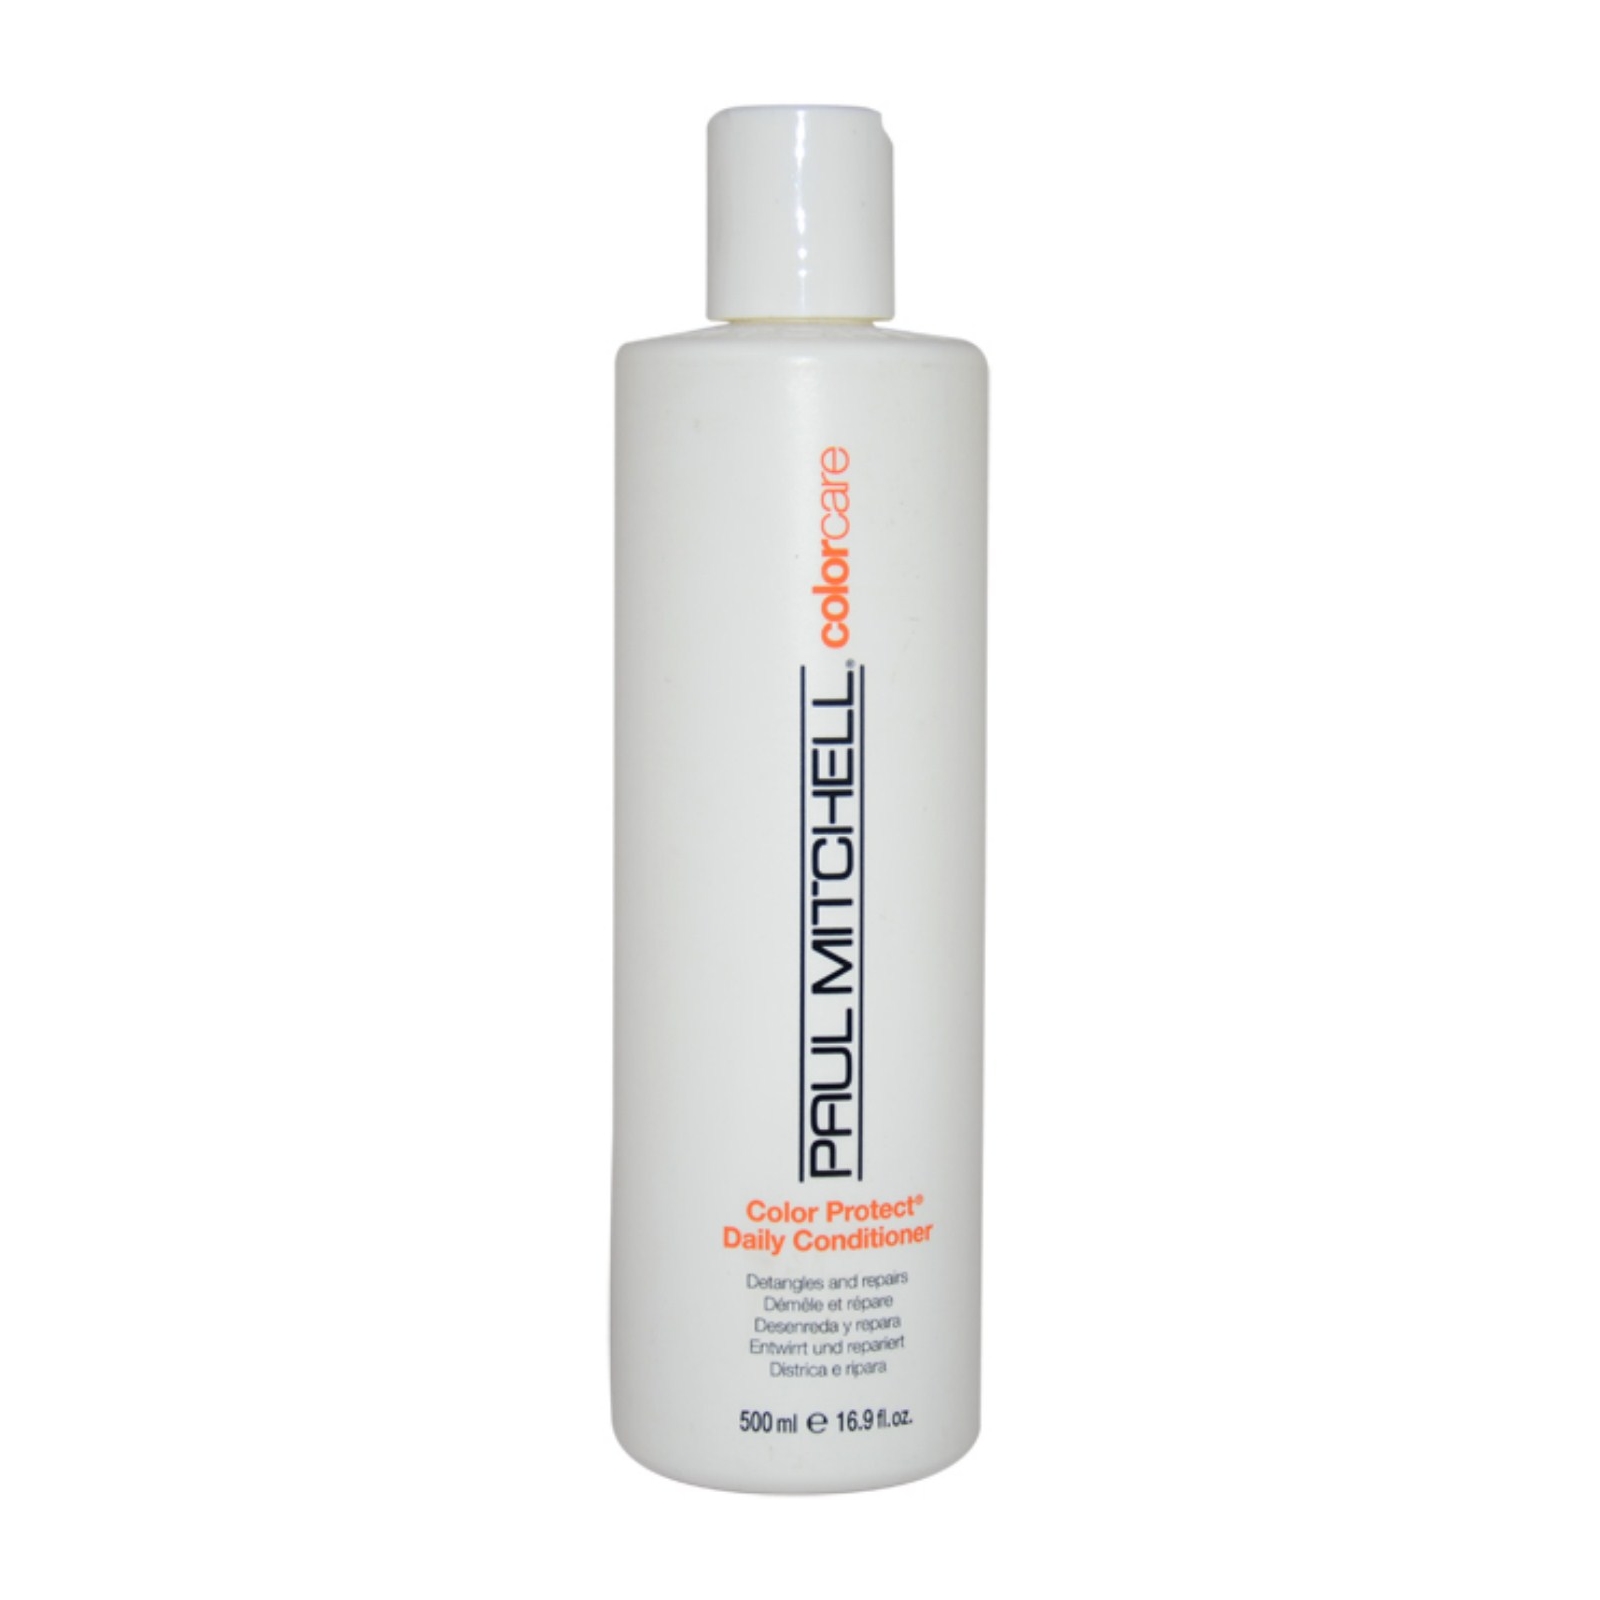 Paul Mitchell Color Protect Daily Conditioner by  for Unisex - 16.9 oz Conditioner